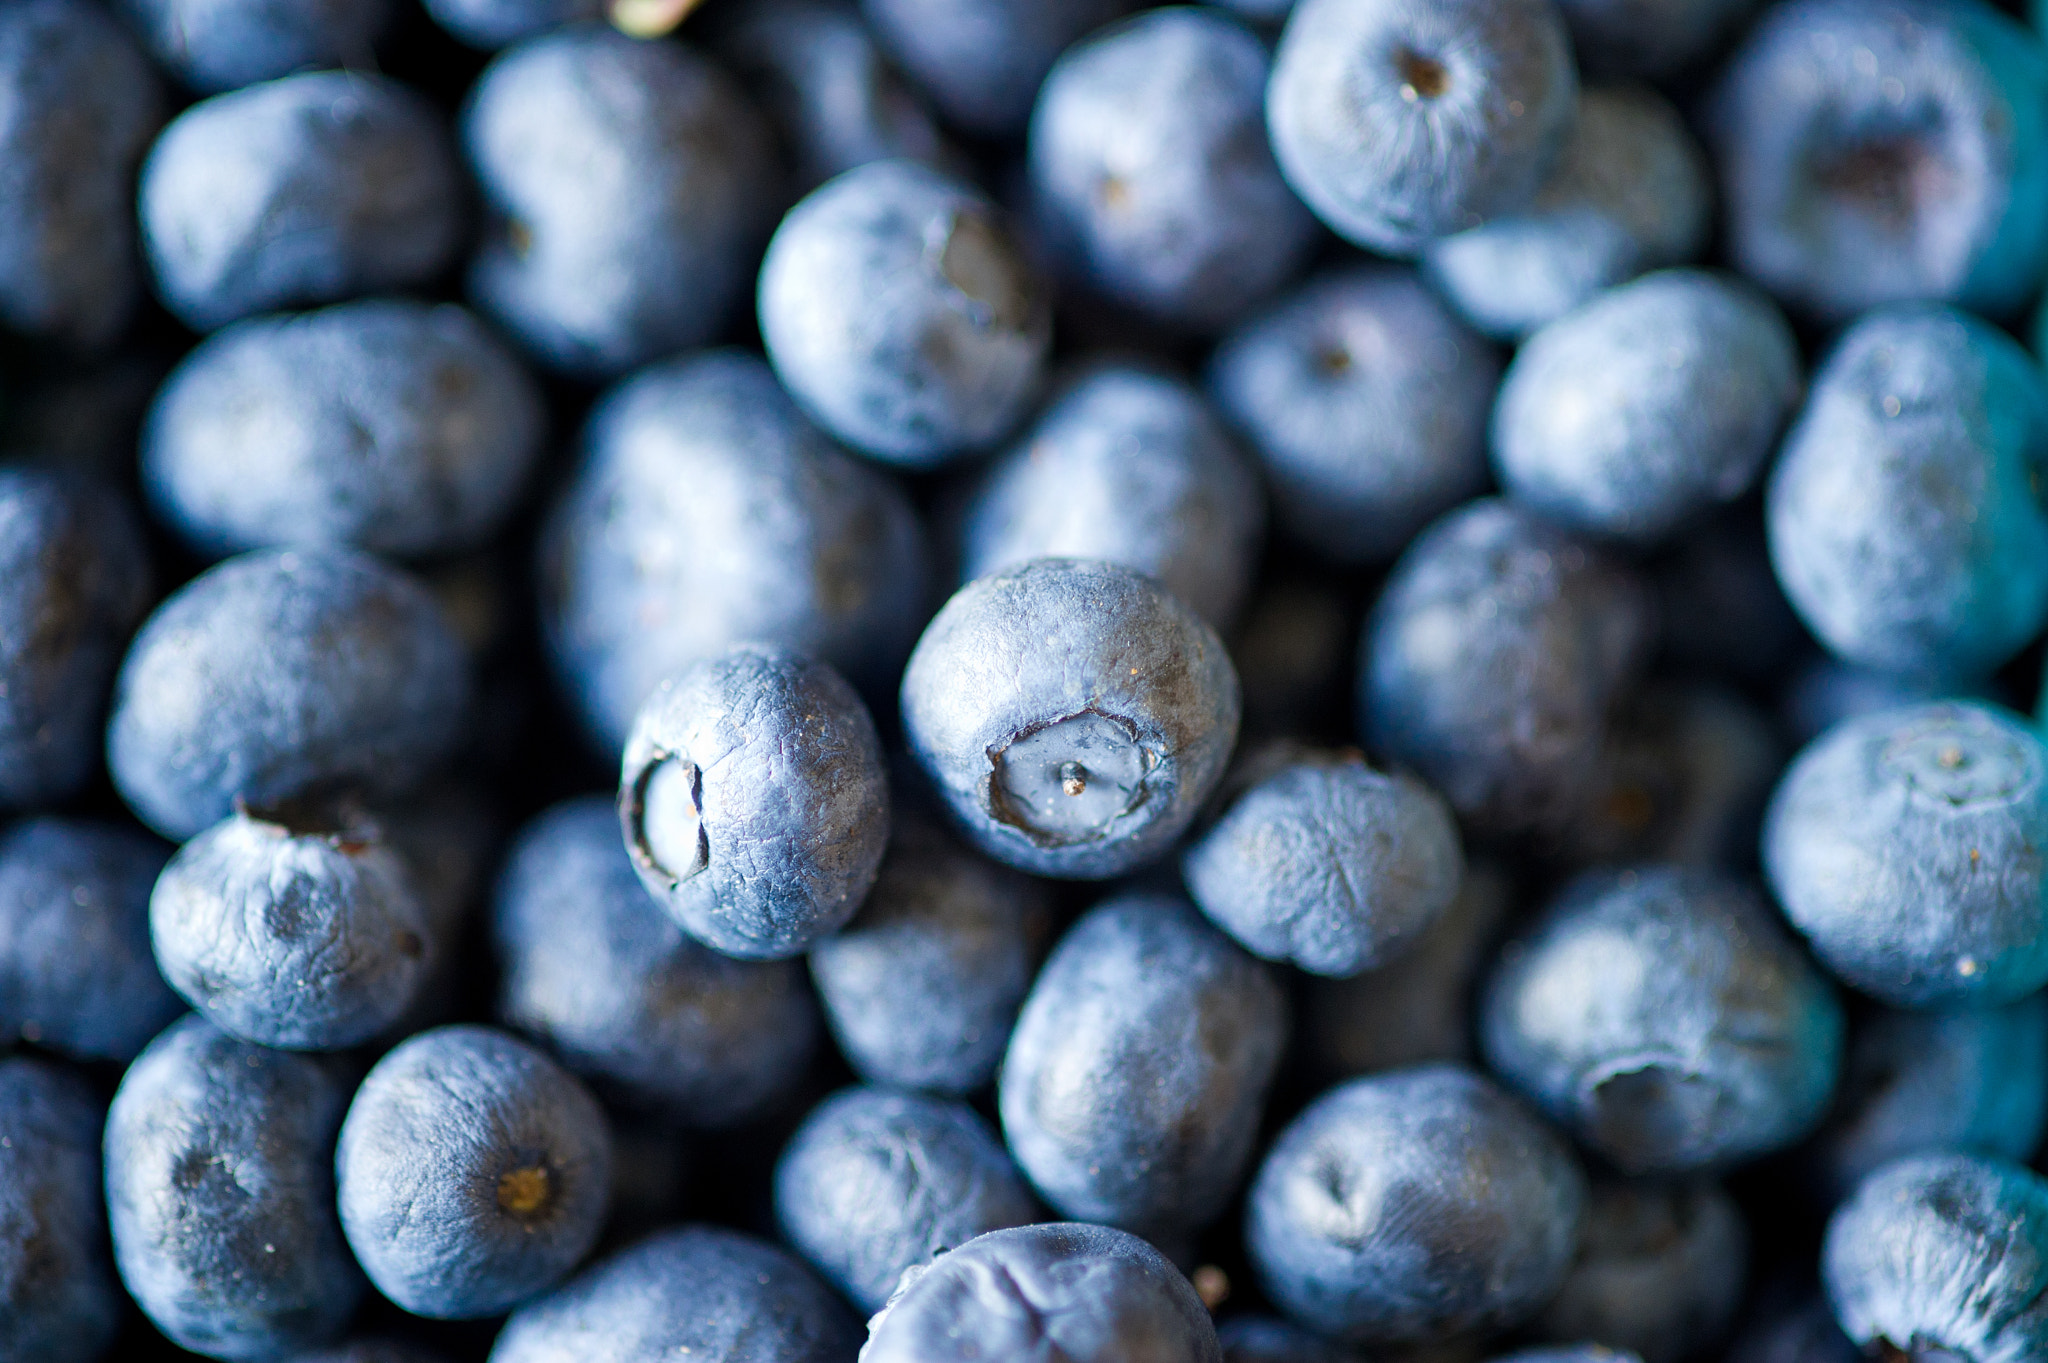 Nikon D3S + Nikon AF-S Micro-Nikkor 105mm F2.8G IF-ED VR sample photo. Crates of blueberries for sale at a farmer's market photography